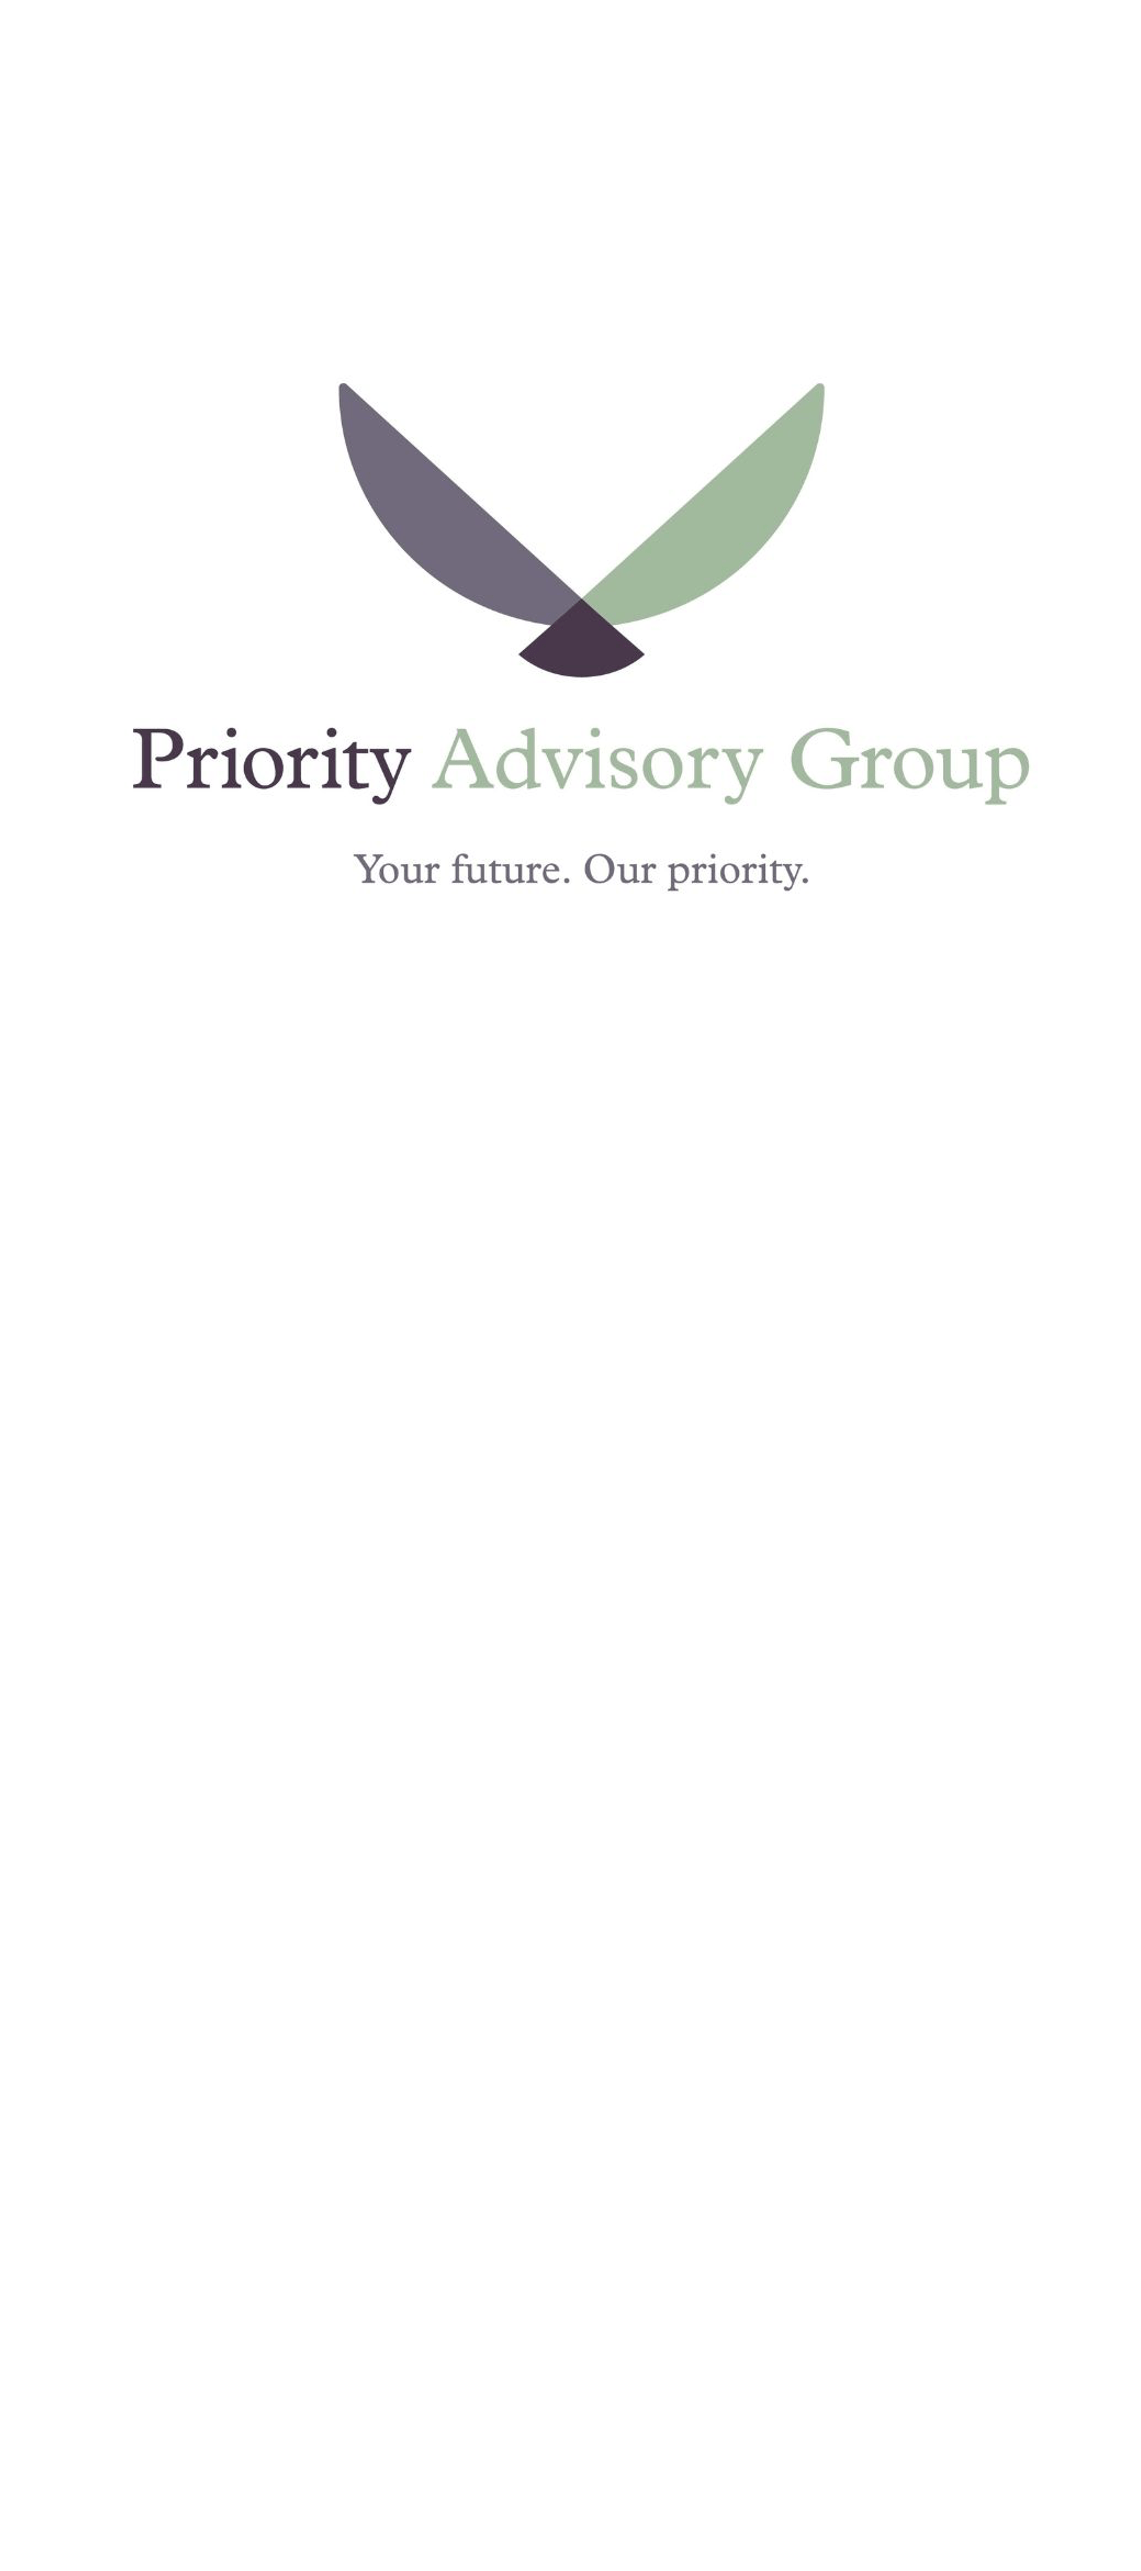 Priority Advisory Group - A DR Care Solutions Partner